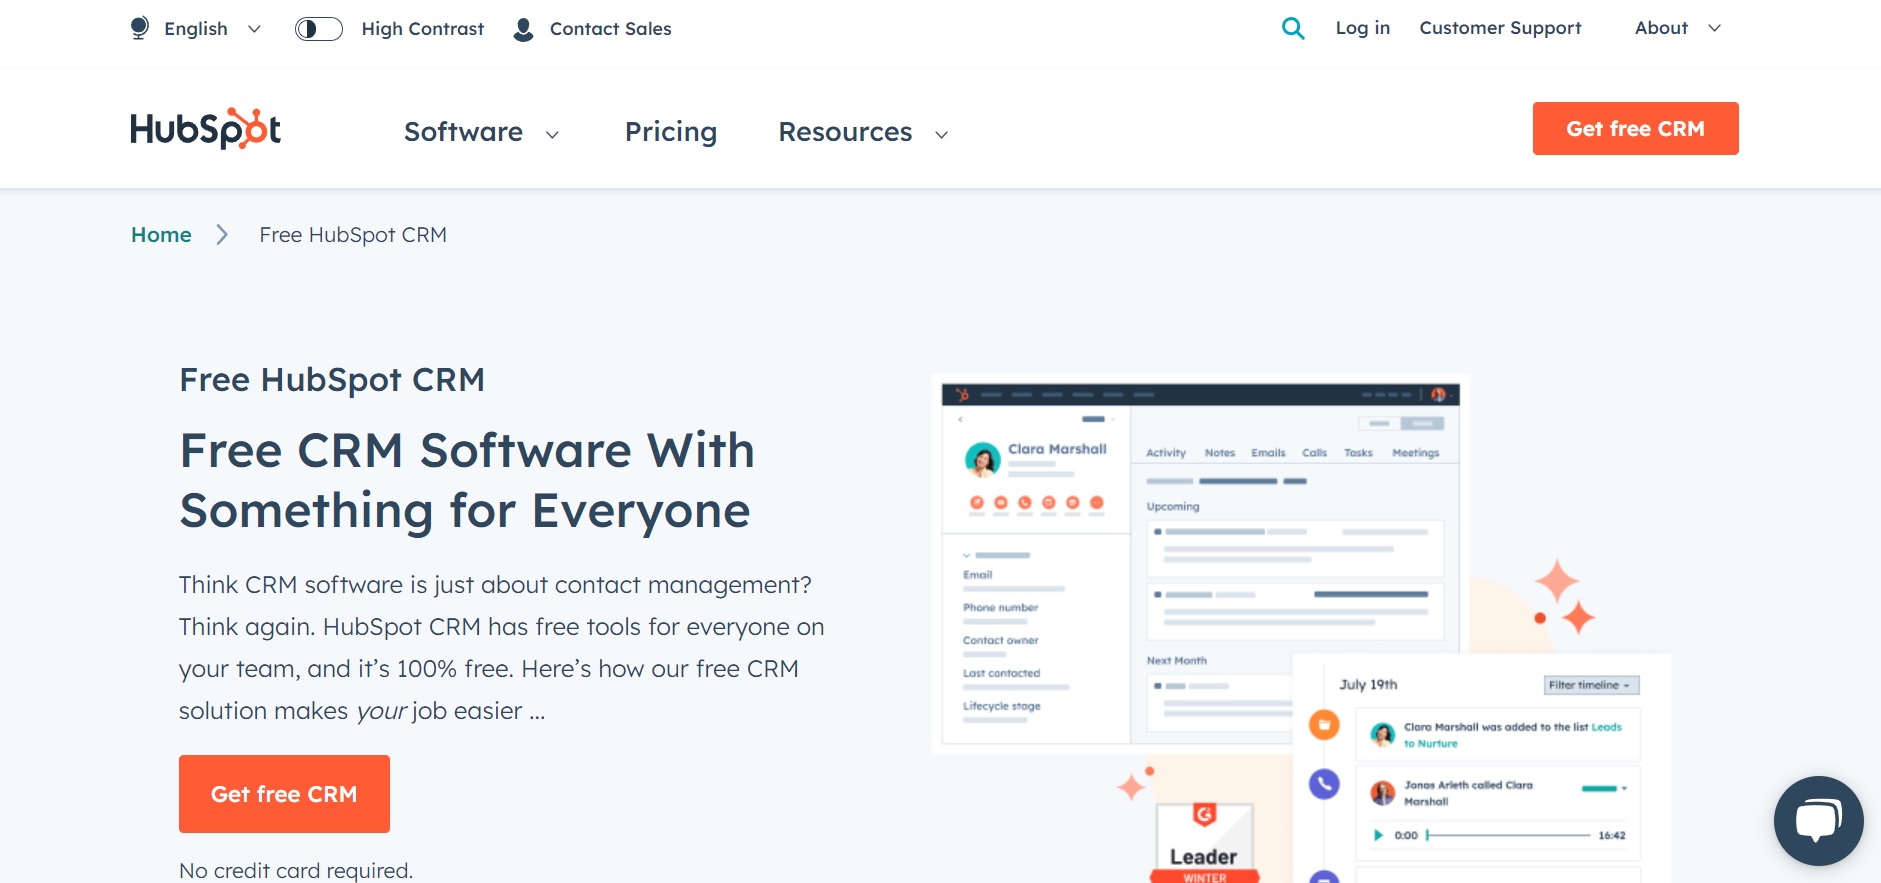 HubSpot - role of CRM